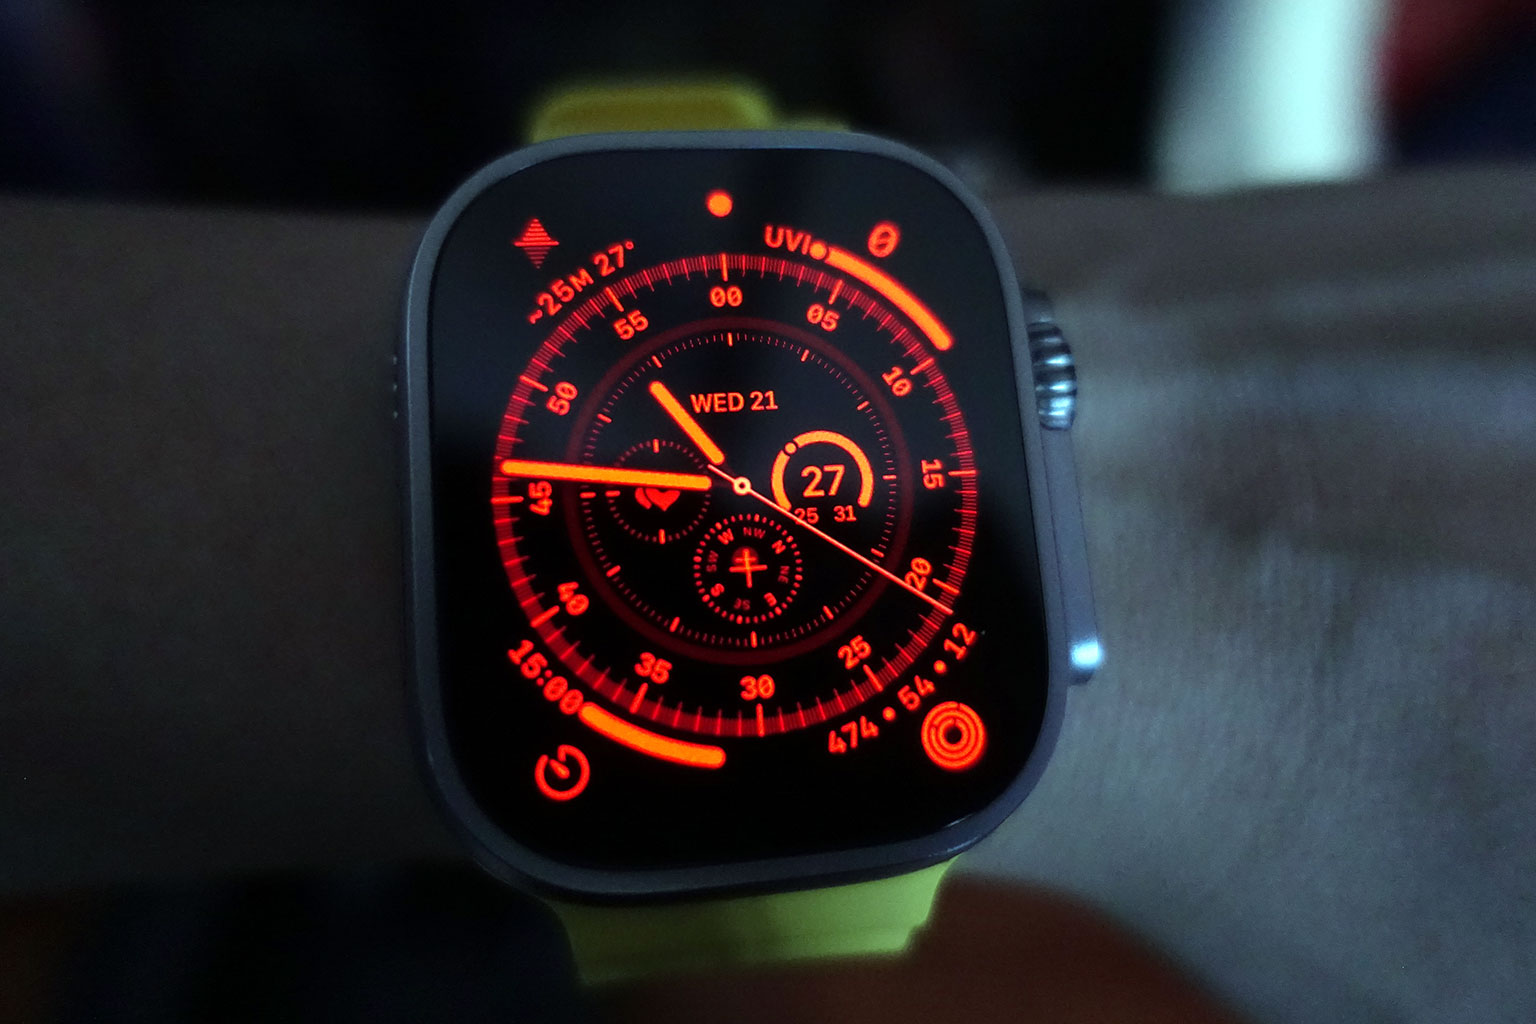 My personal favourite watch face is the "Wayfinder", which has a night mode that can be activated by scrolling the Digital Crown upwards.